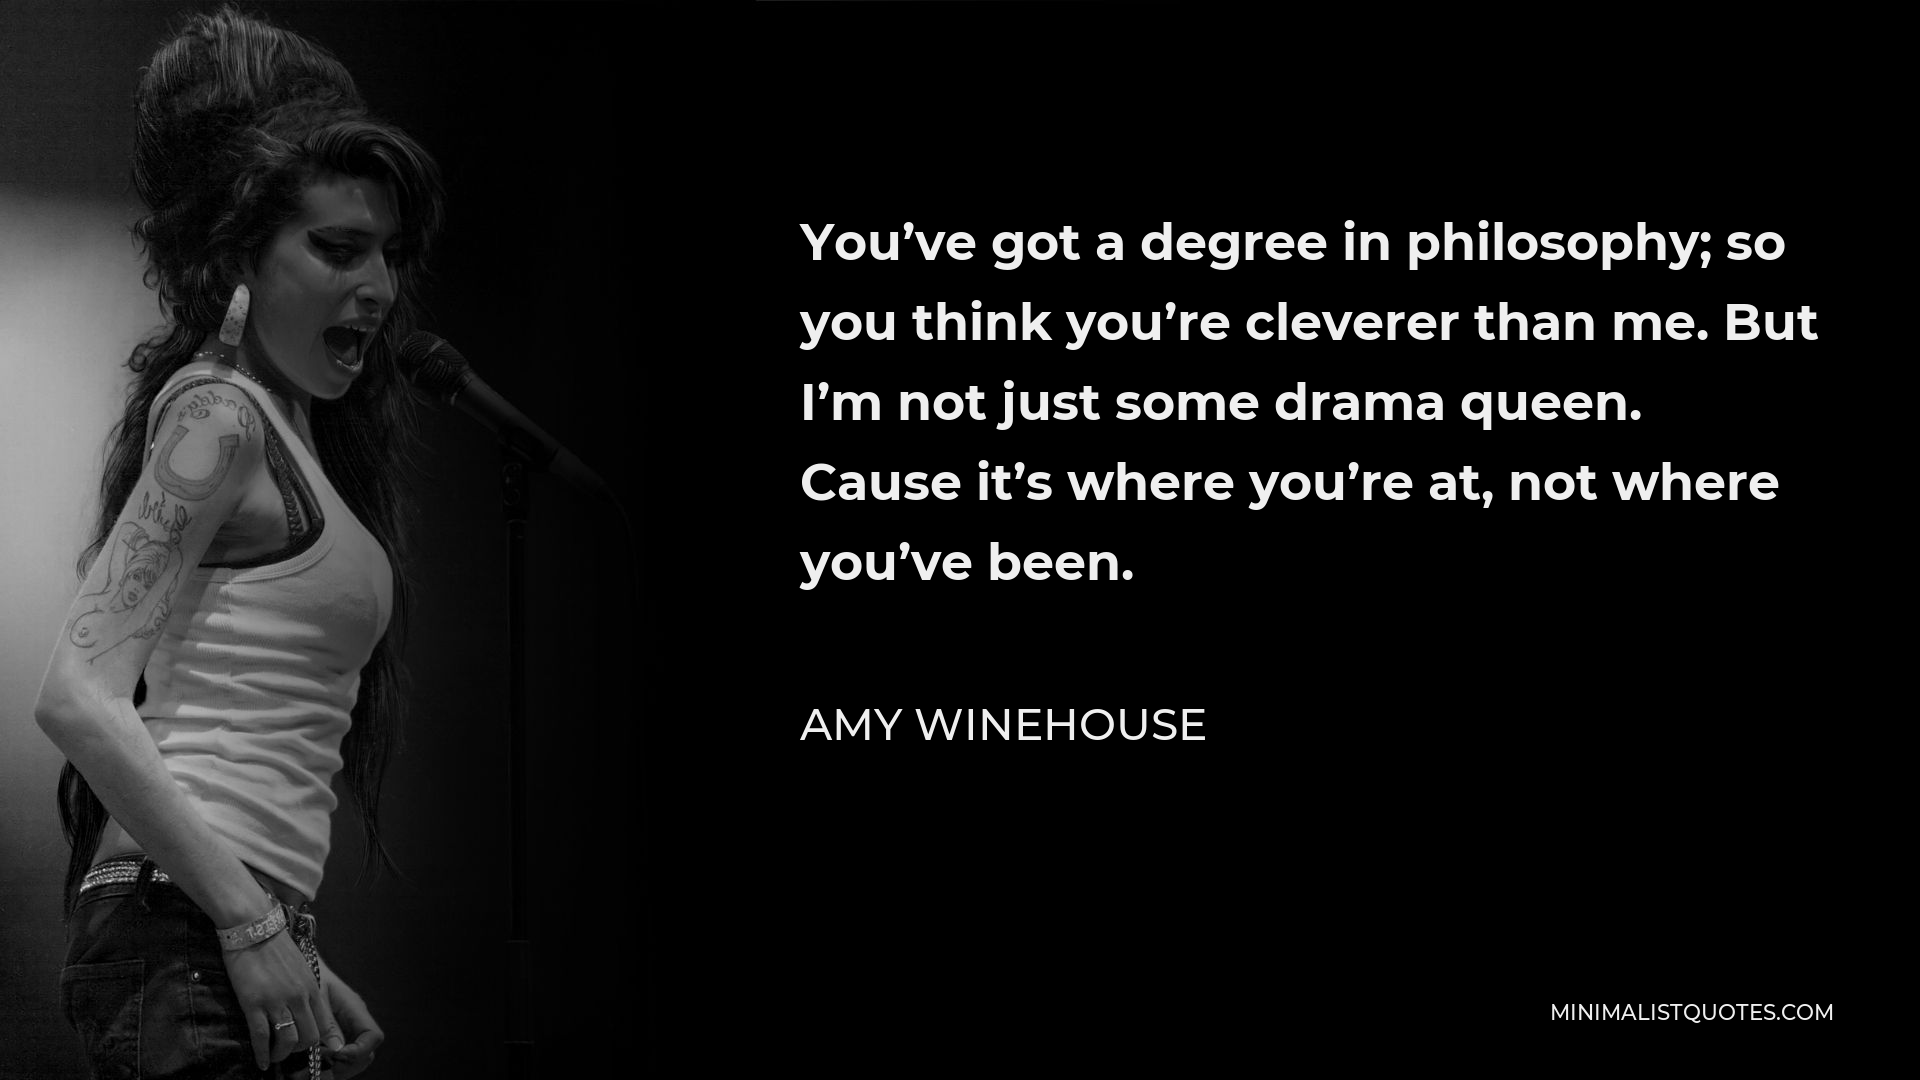 Amy Winehouse Quote - You’ve got a degree in philosophy; so you think you’re cleverer than me. But I’m not just some drama queen. Cause it’s where you’re at, not where you’ve been.